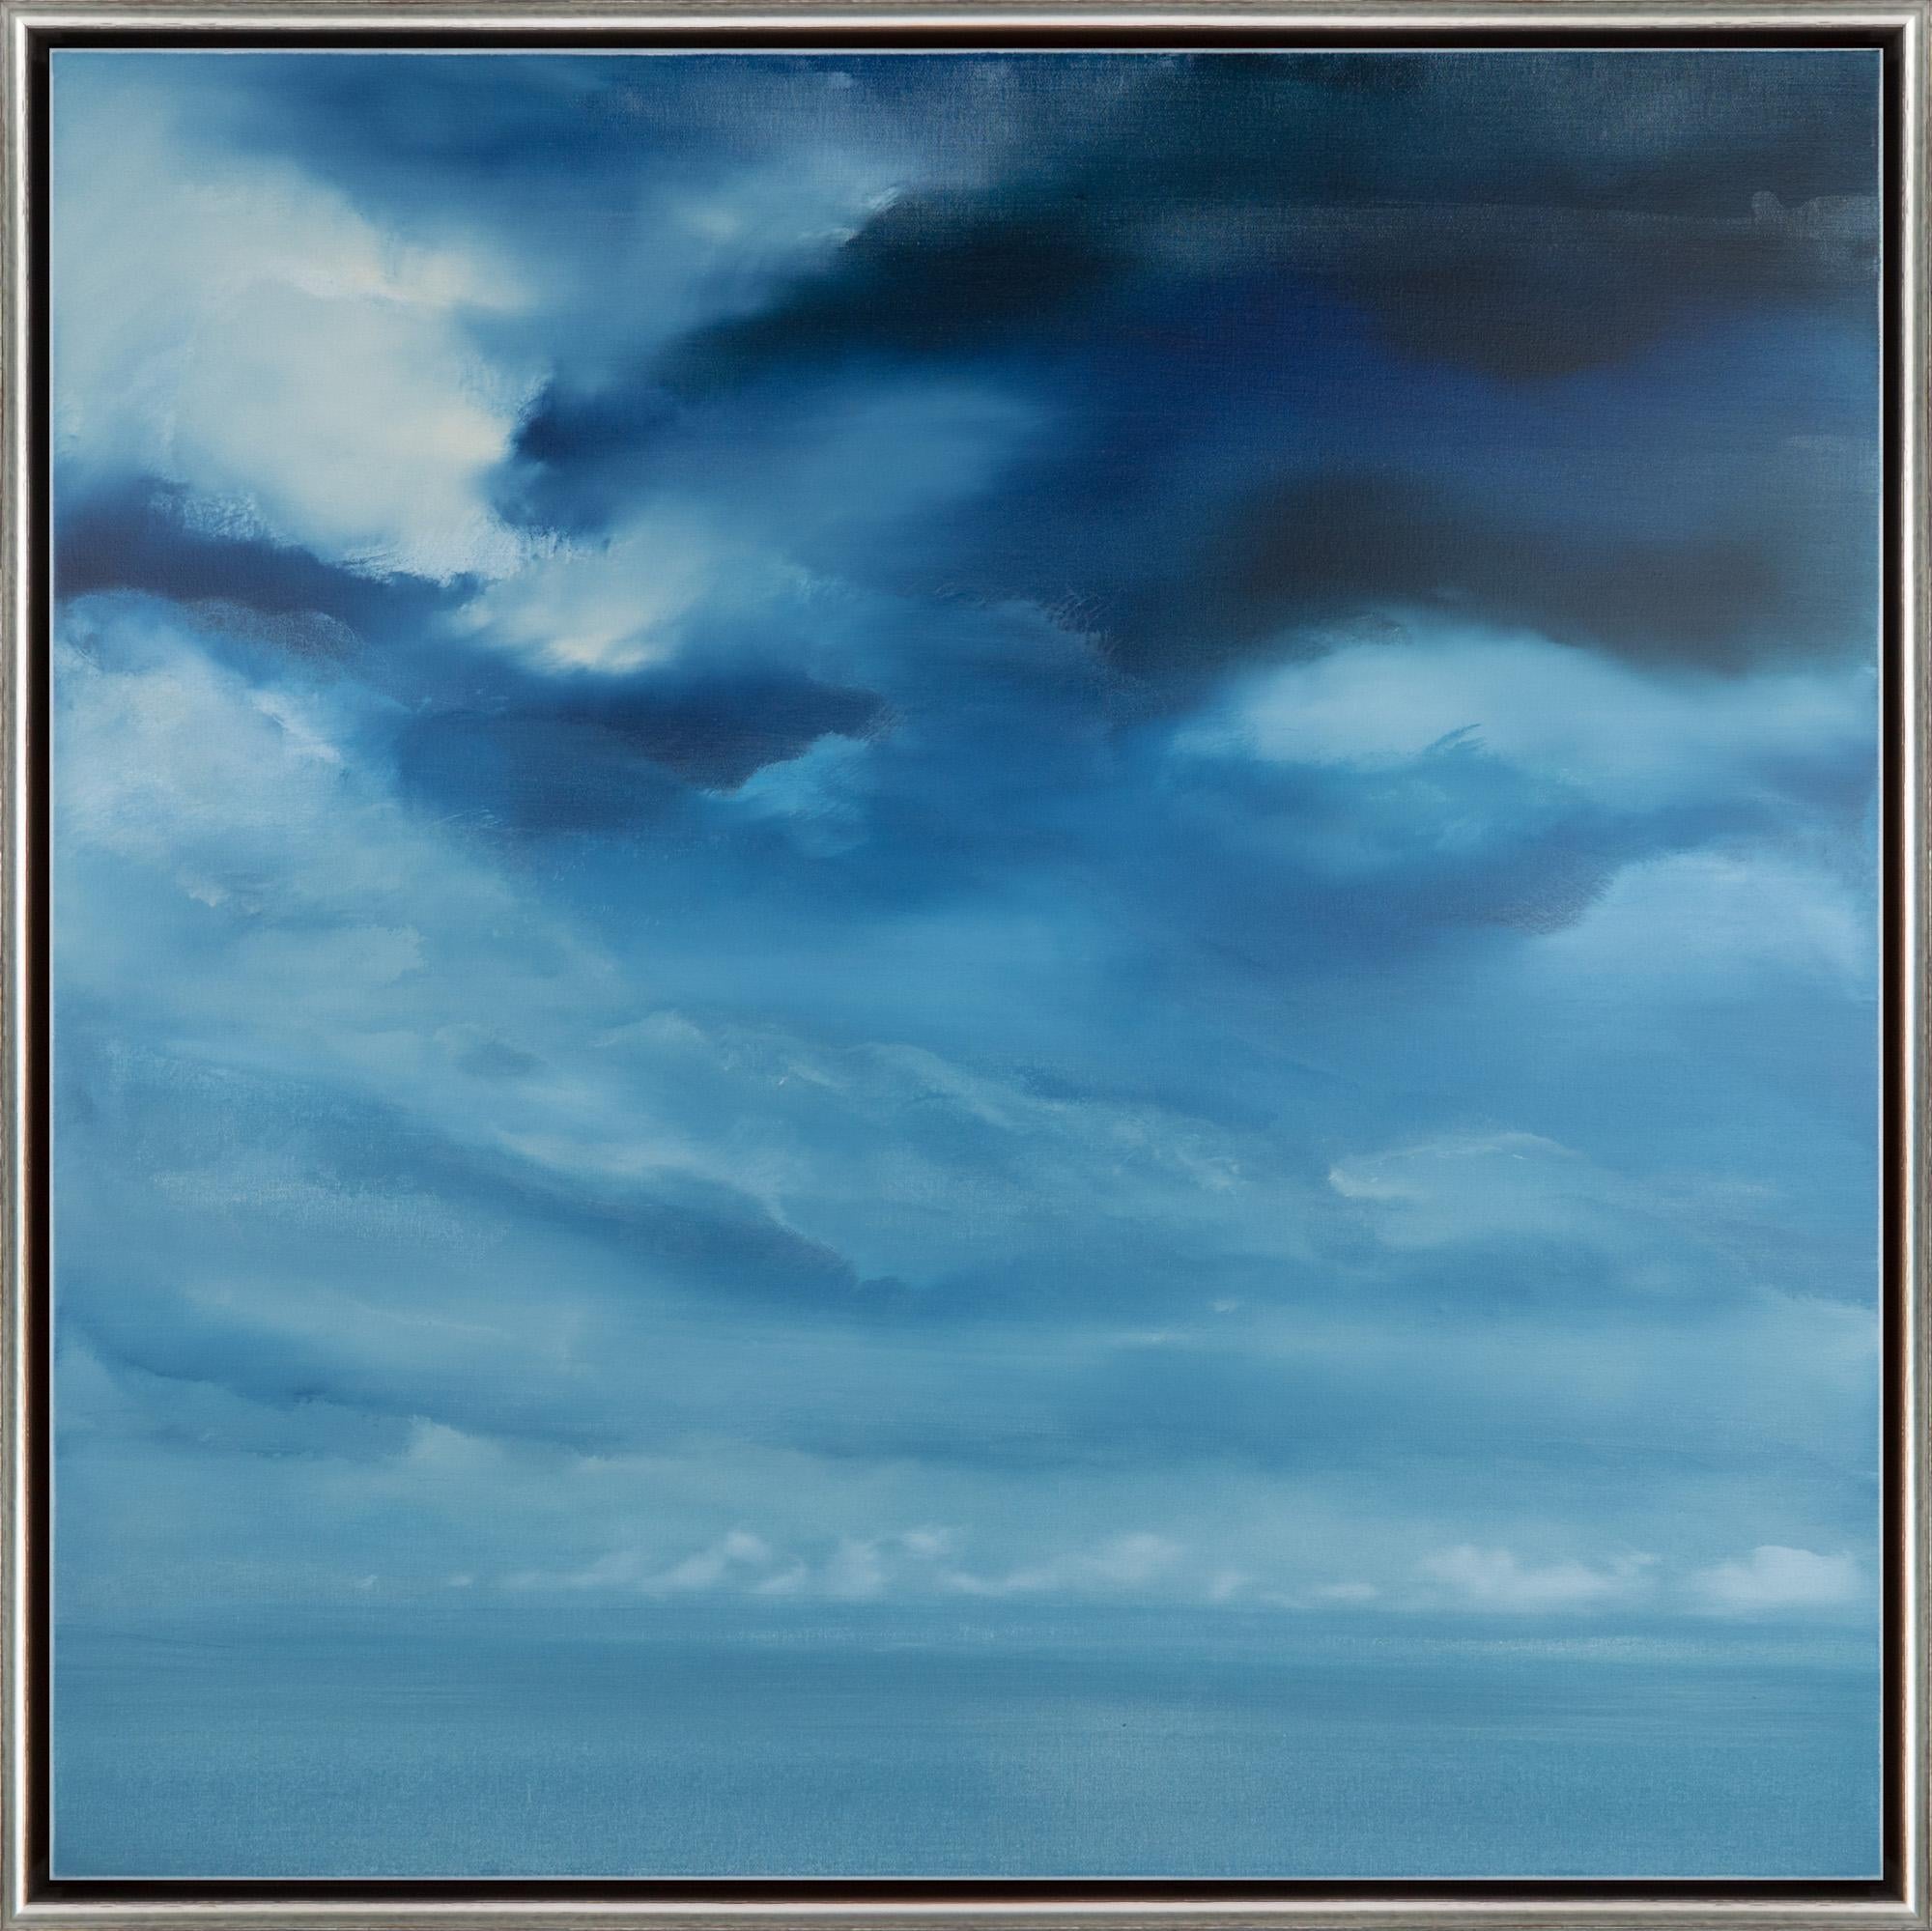 Charlie Bluett Landscape Painting - "Up To The Light" Cloudscape Sky Waterscape, Framed Acrylic on Canvas Painting